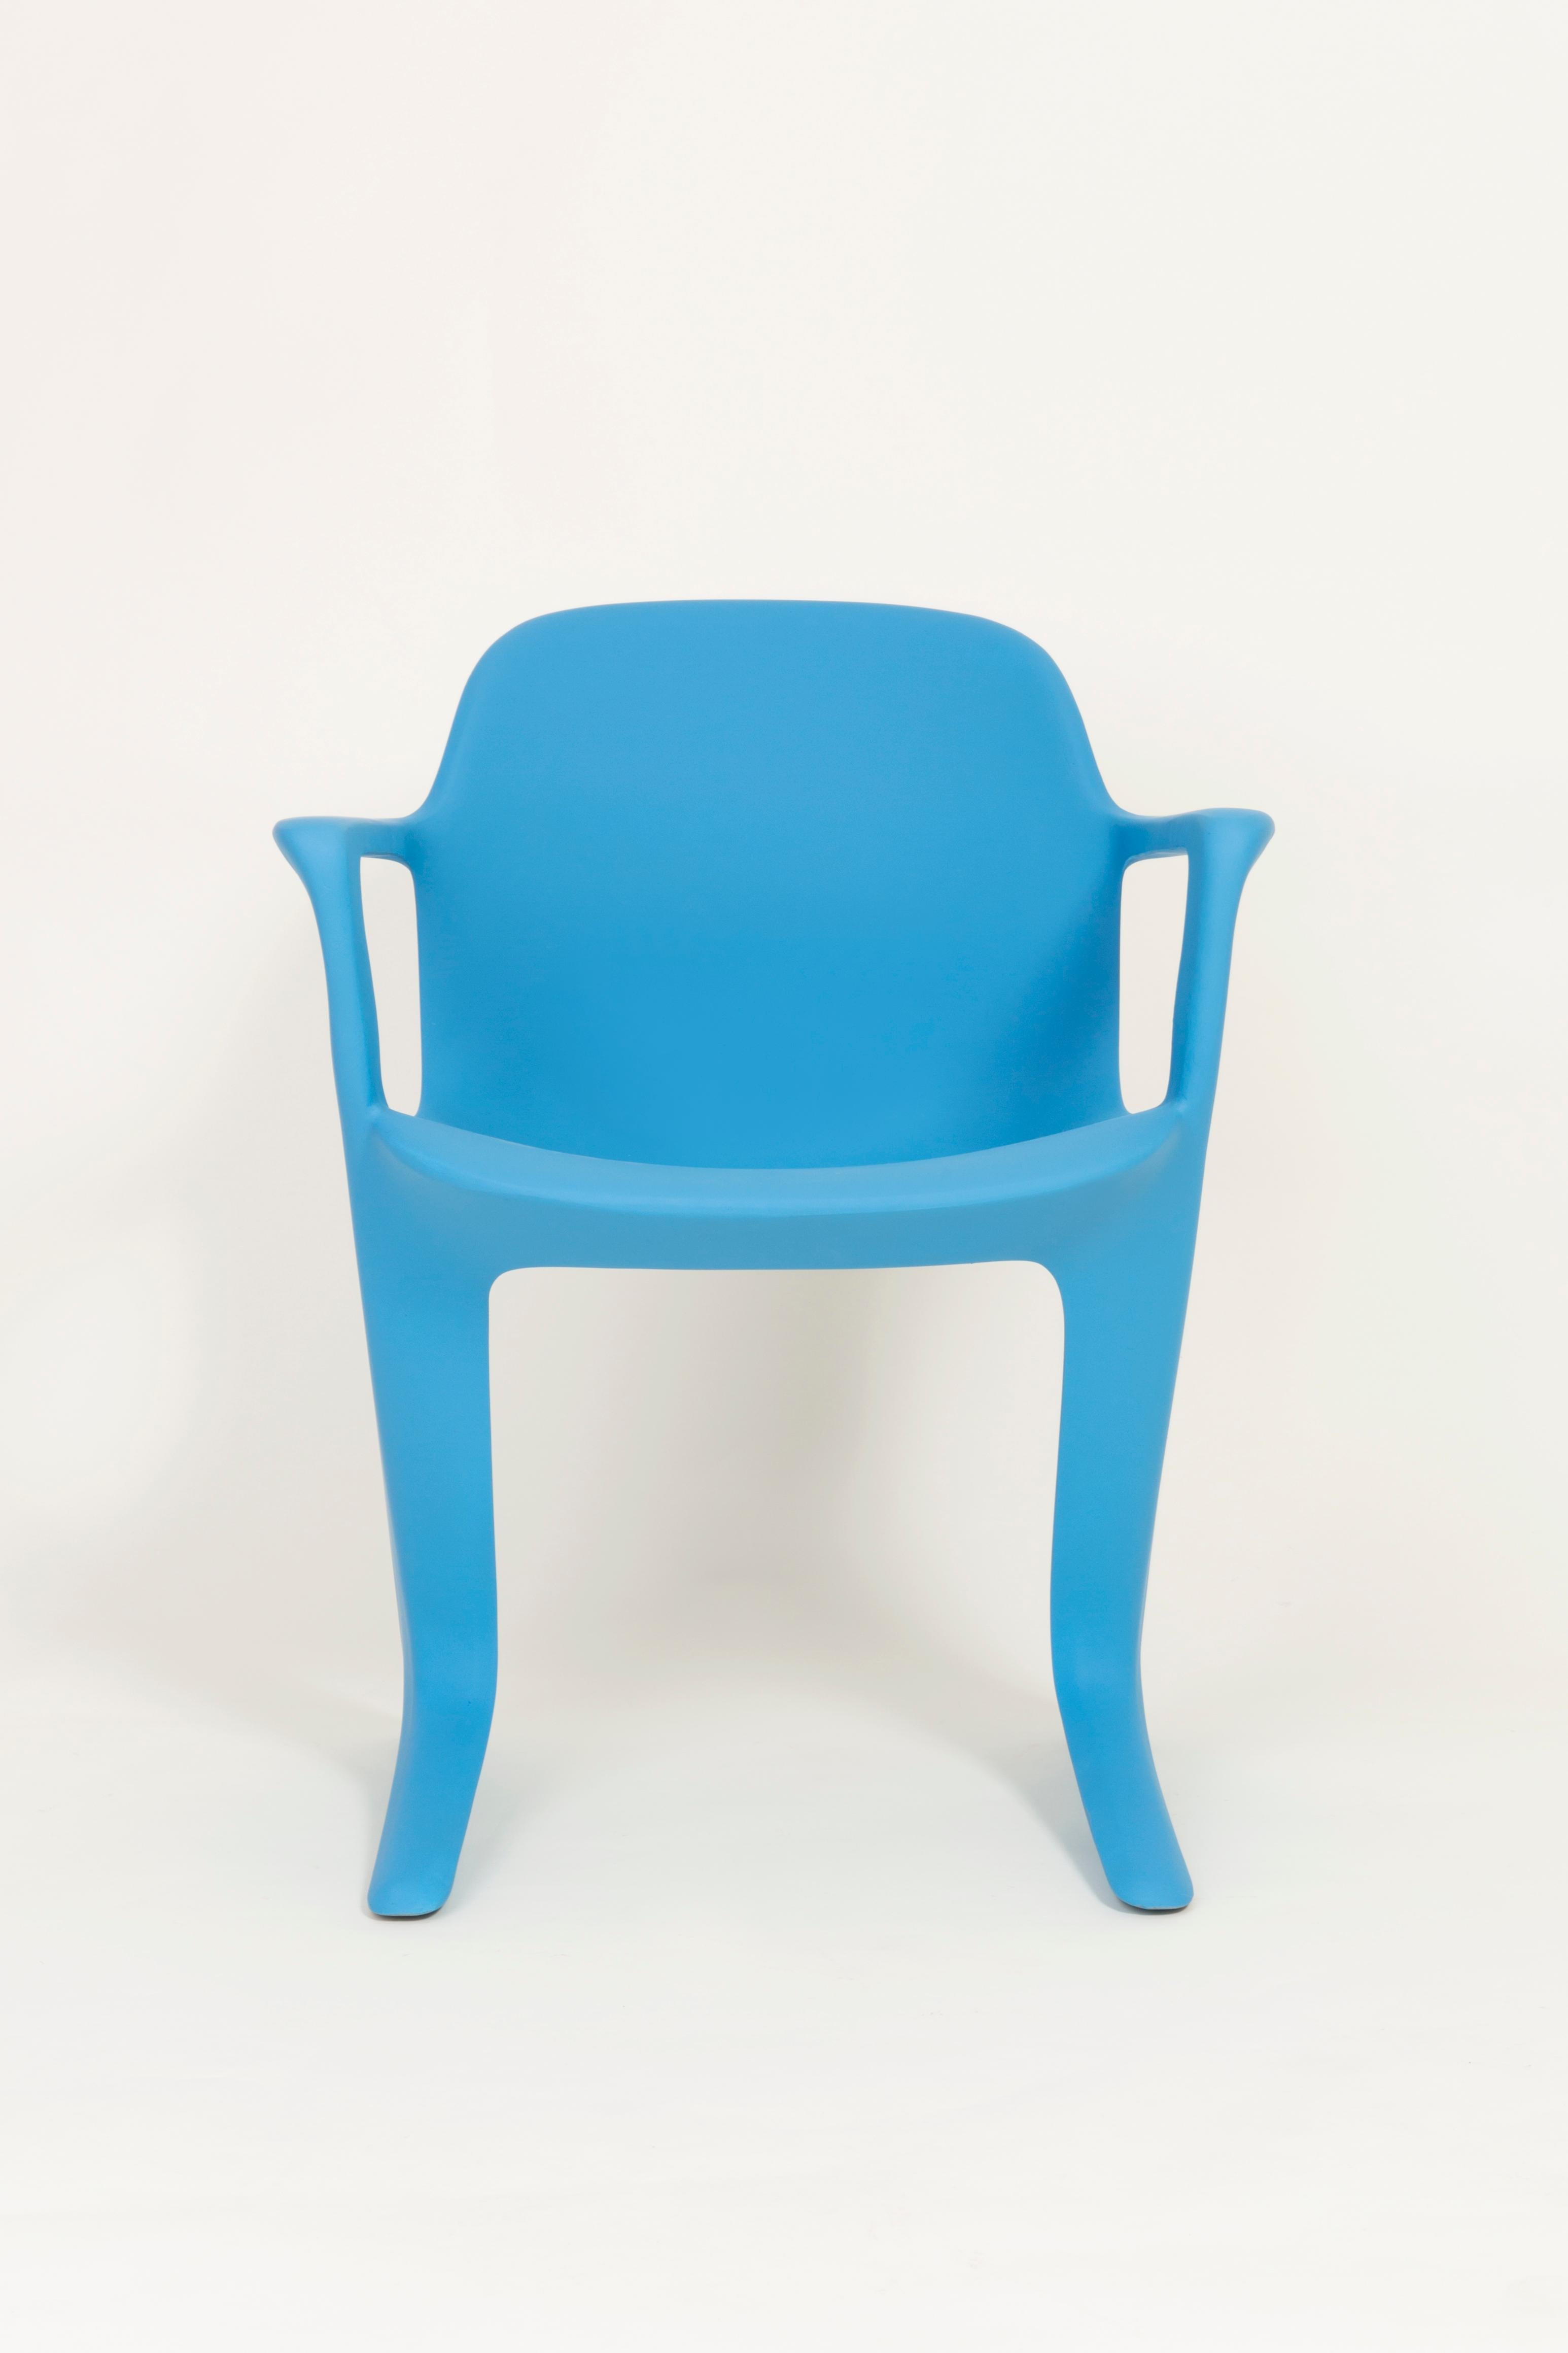 Set of Two Blue Kangaroo Chairs Designed by Ernst Moeckl, Germany, 1968 For Sale 1